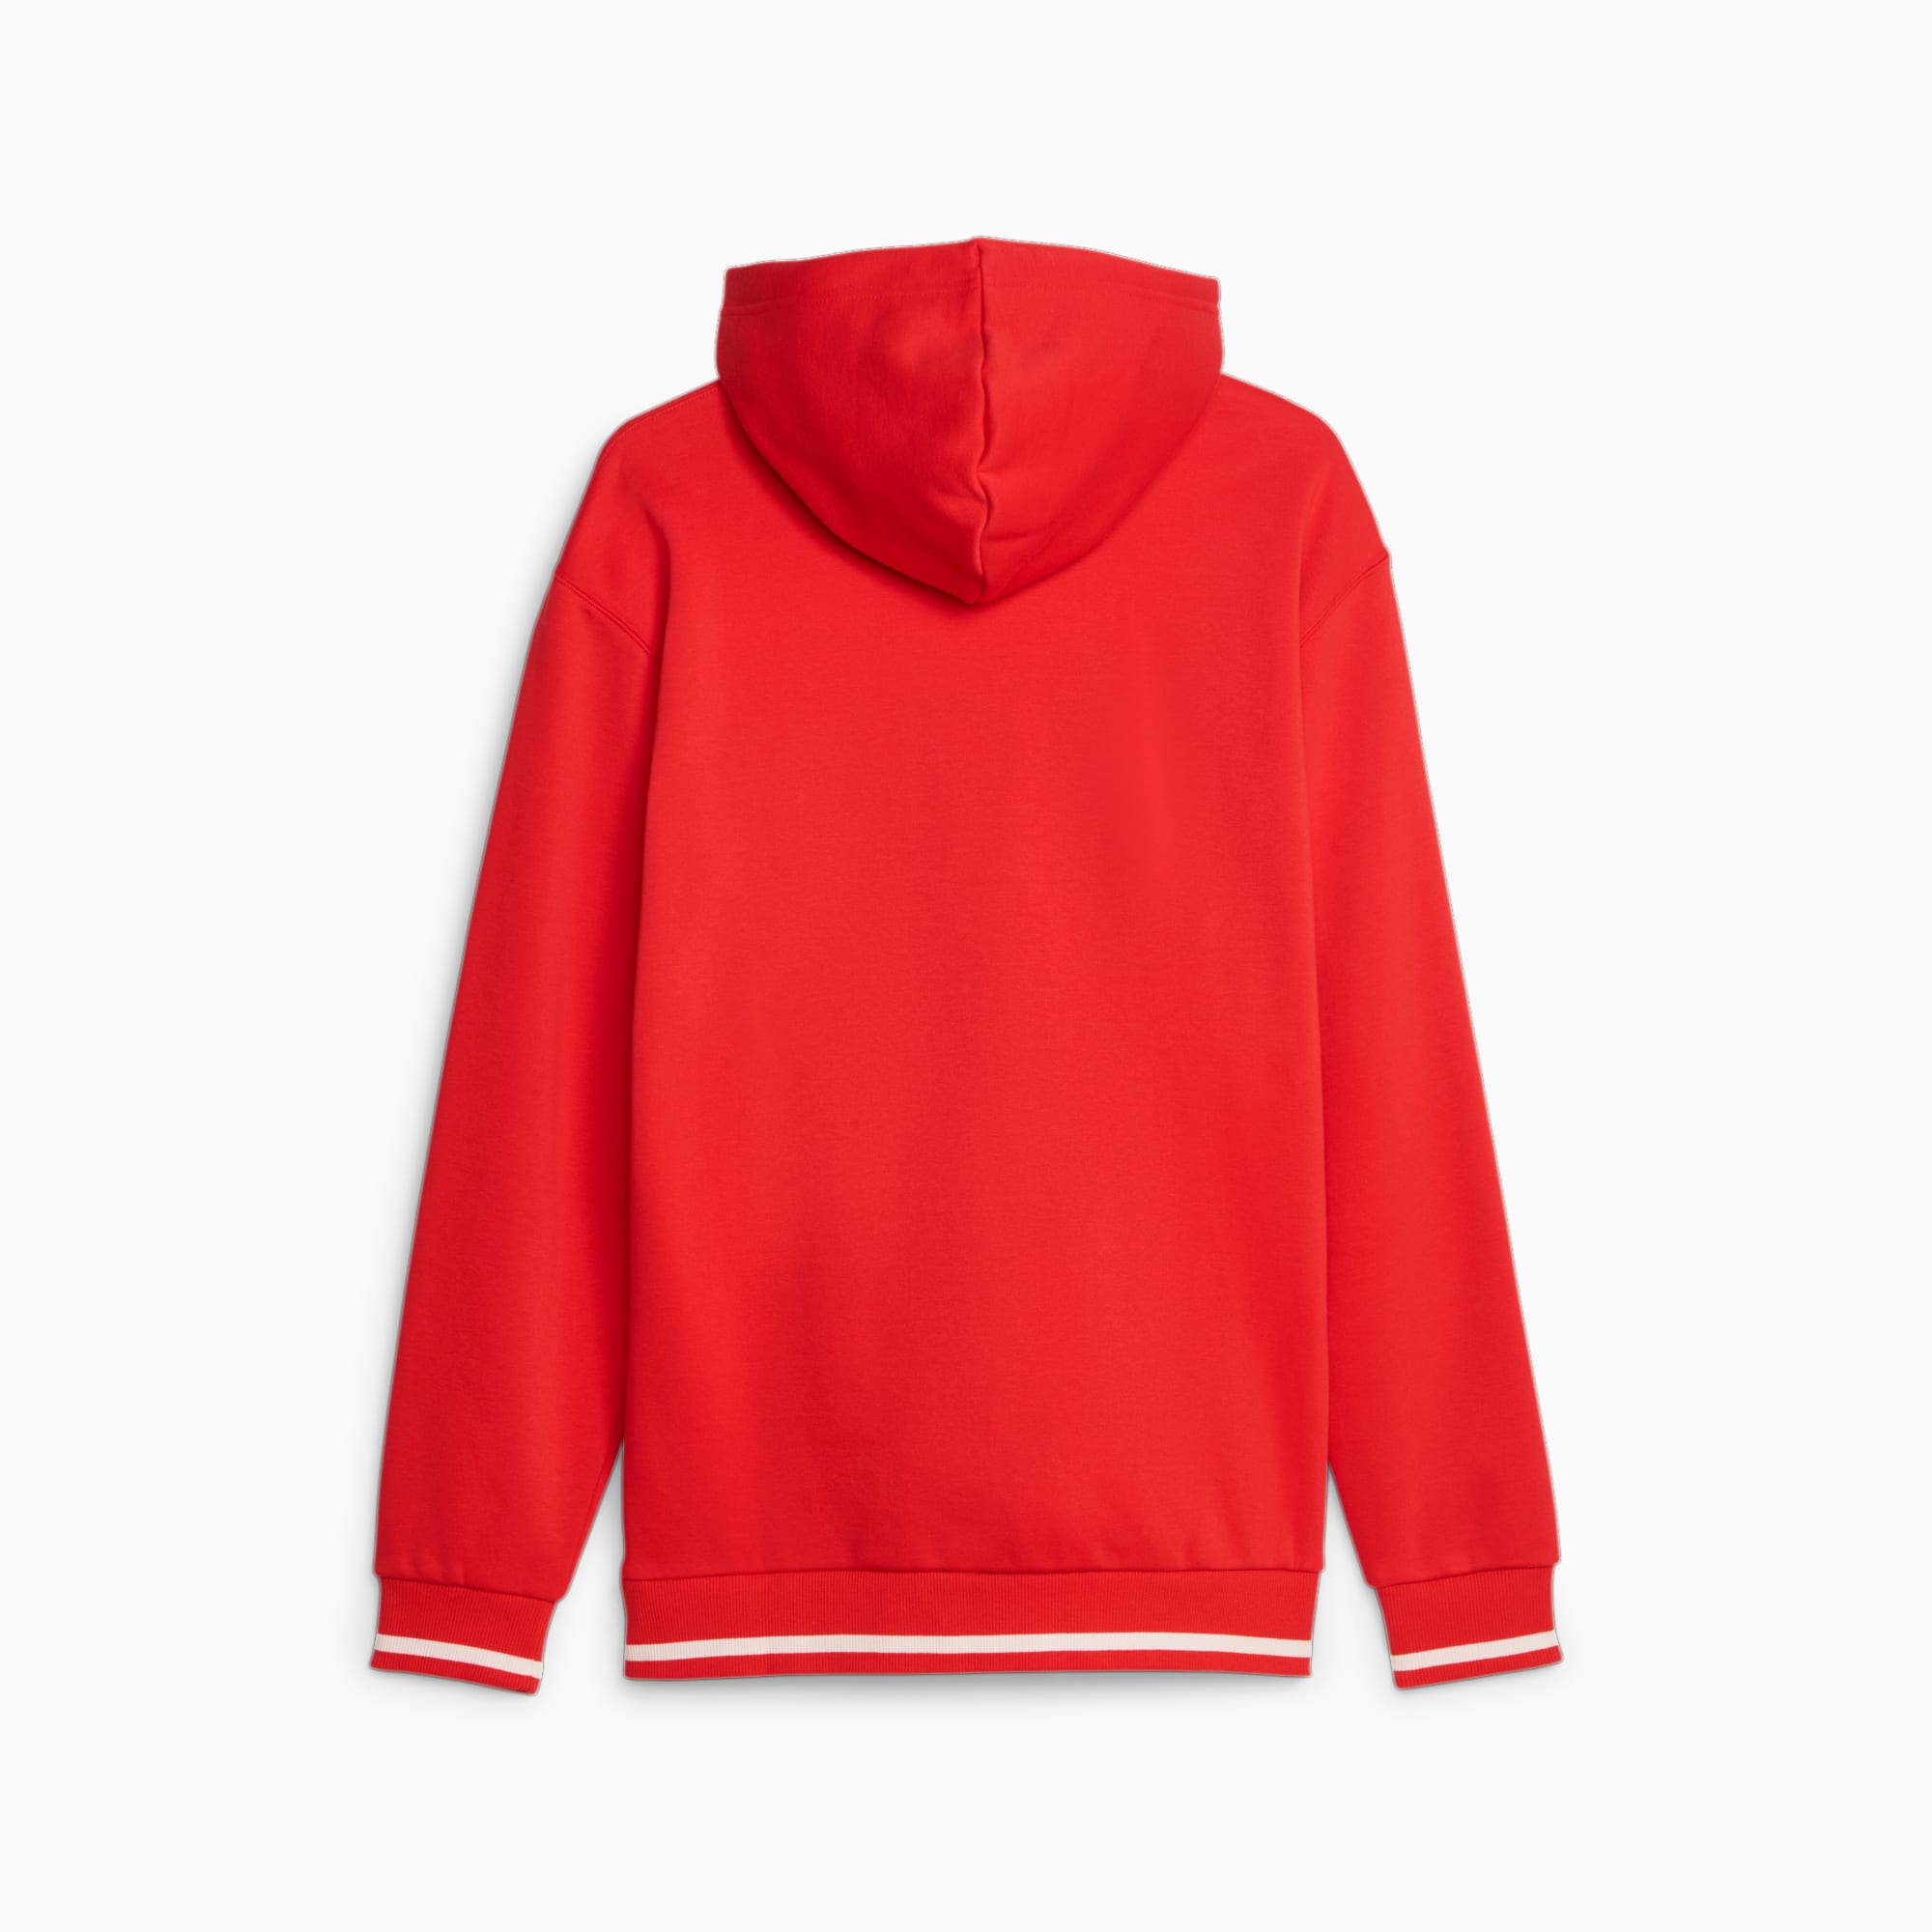 PUMA Squad Men's Hoodie, For All Time Red, Size XS, Clothing